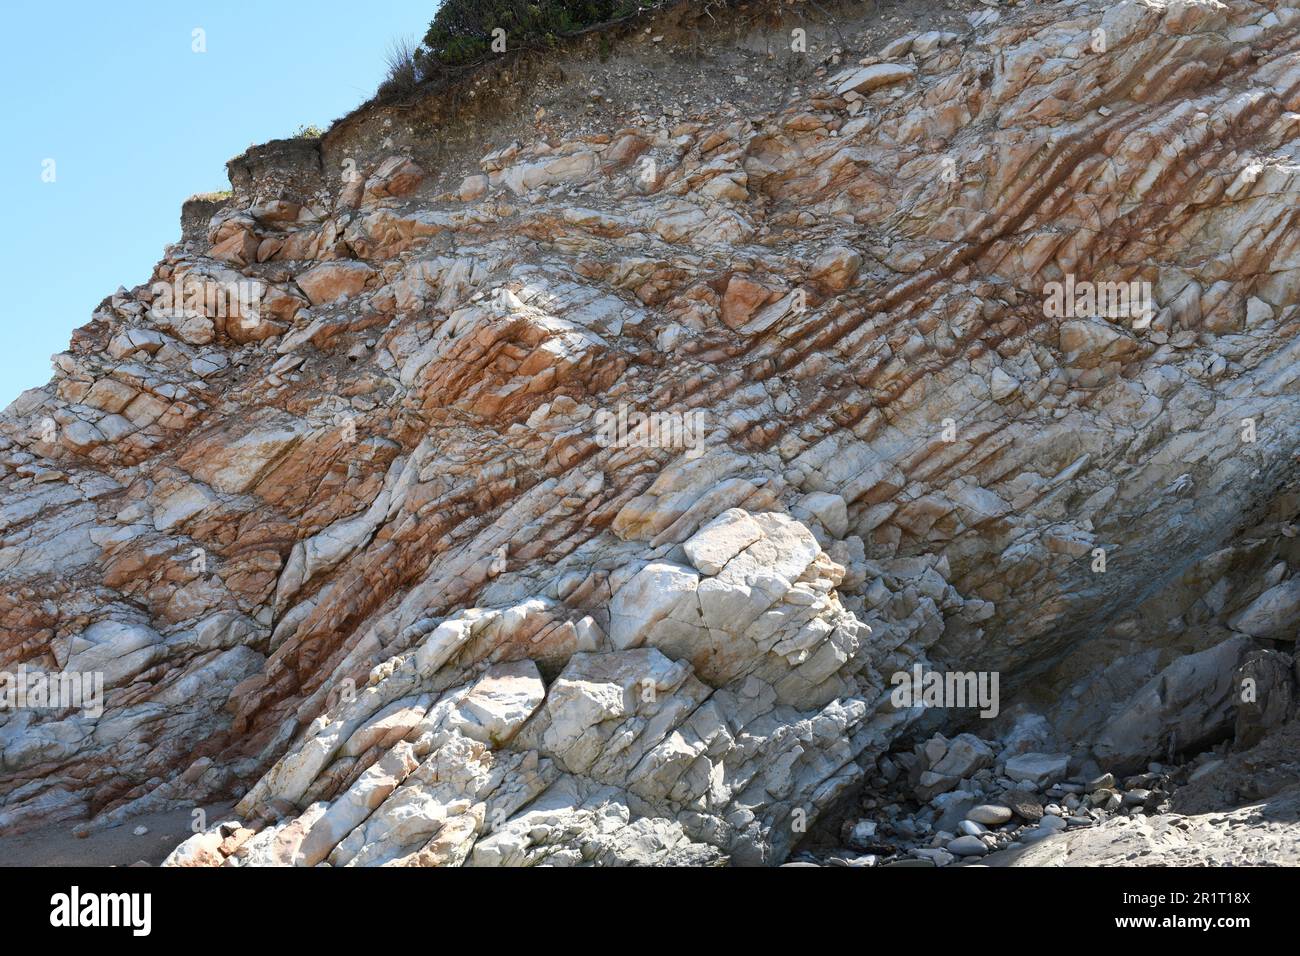 Limestone layers and soil. This photo was taken in Bidart, Aquitaine, France. Stock Photo